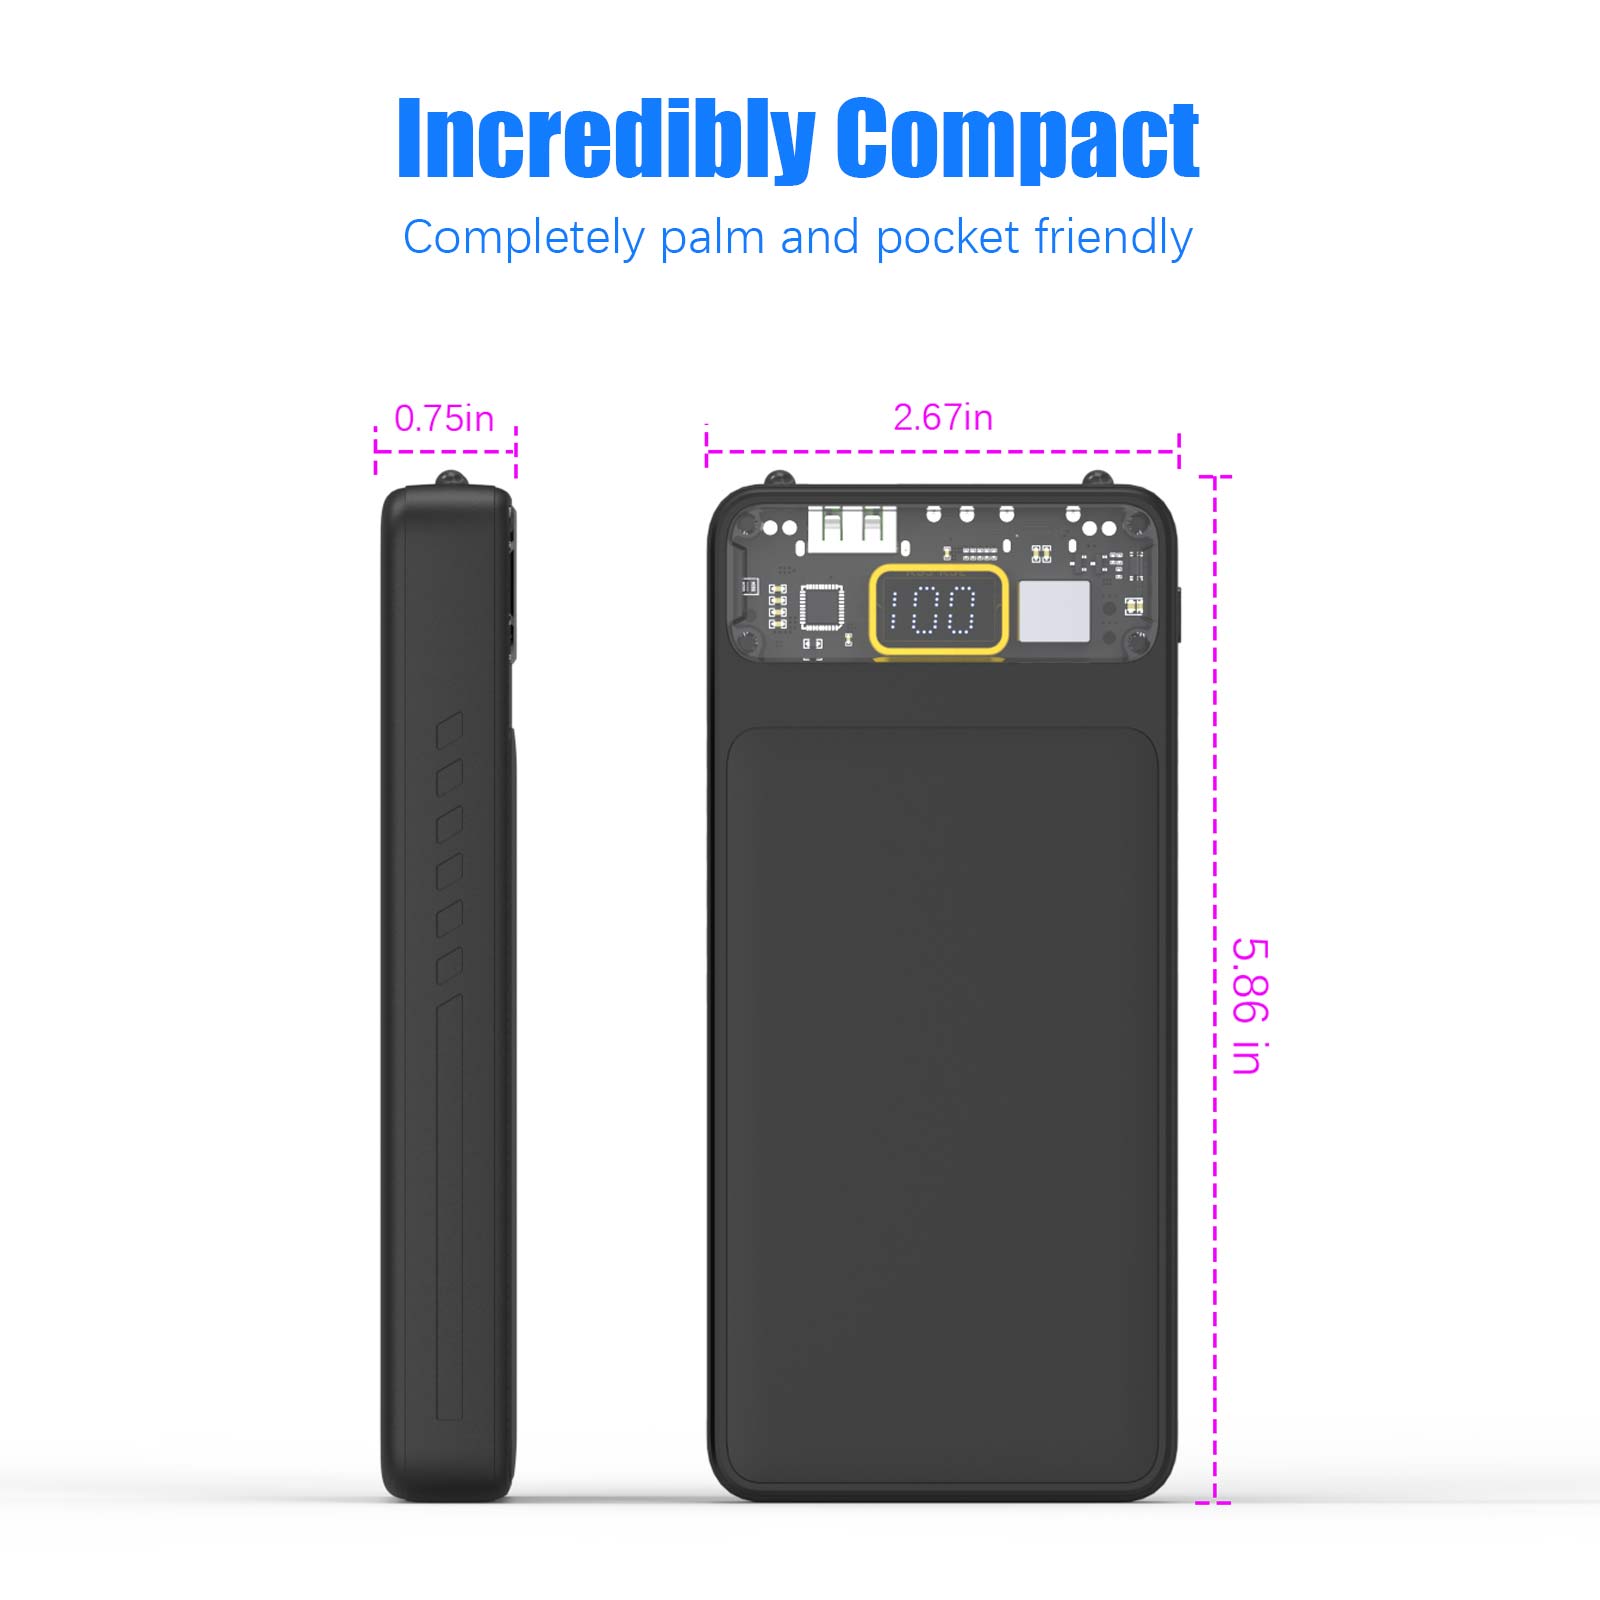 Flashlight Power Bank, Powerbank, 10000mAh Portable Charger with Built-in Cables, TYPE C External Battery Pack For iphone, ipad, Samsung, Huawei, Smartphones etc.